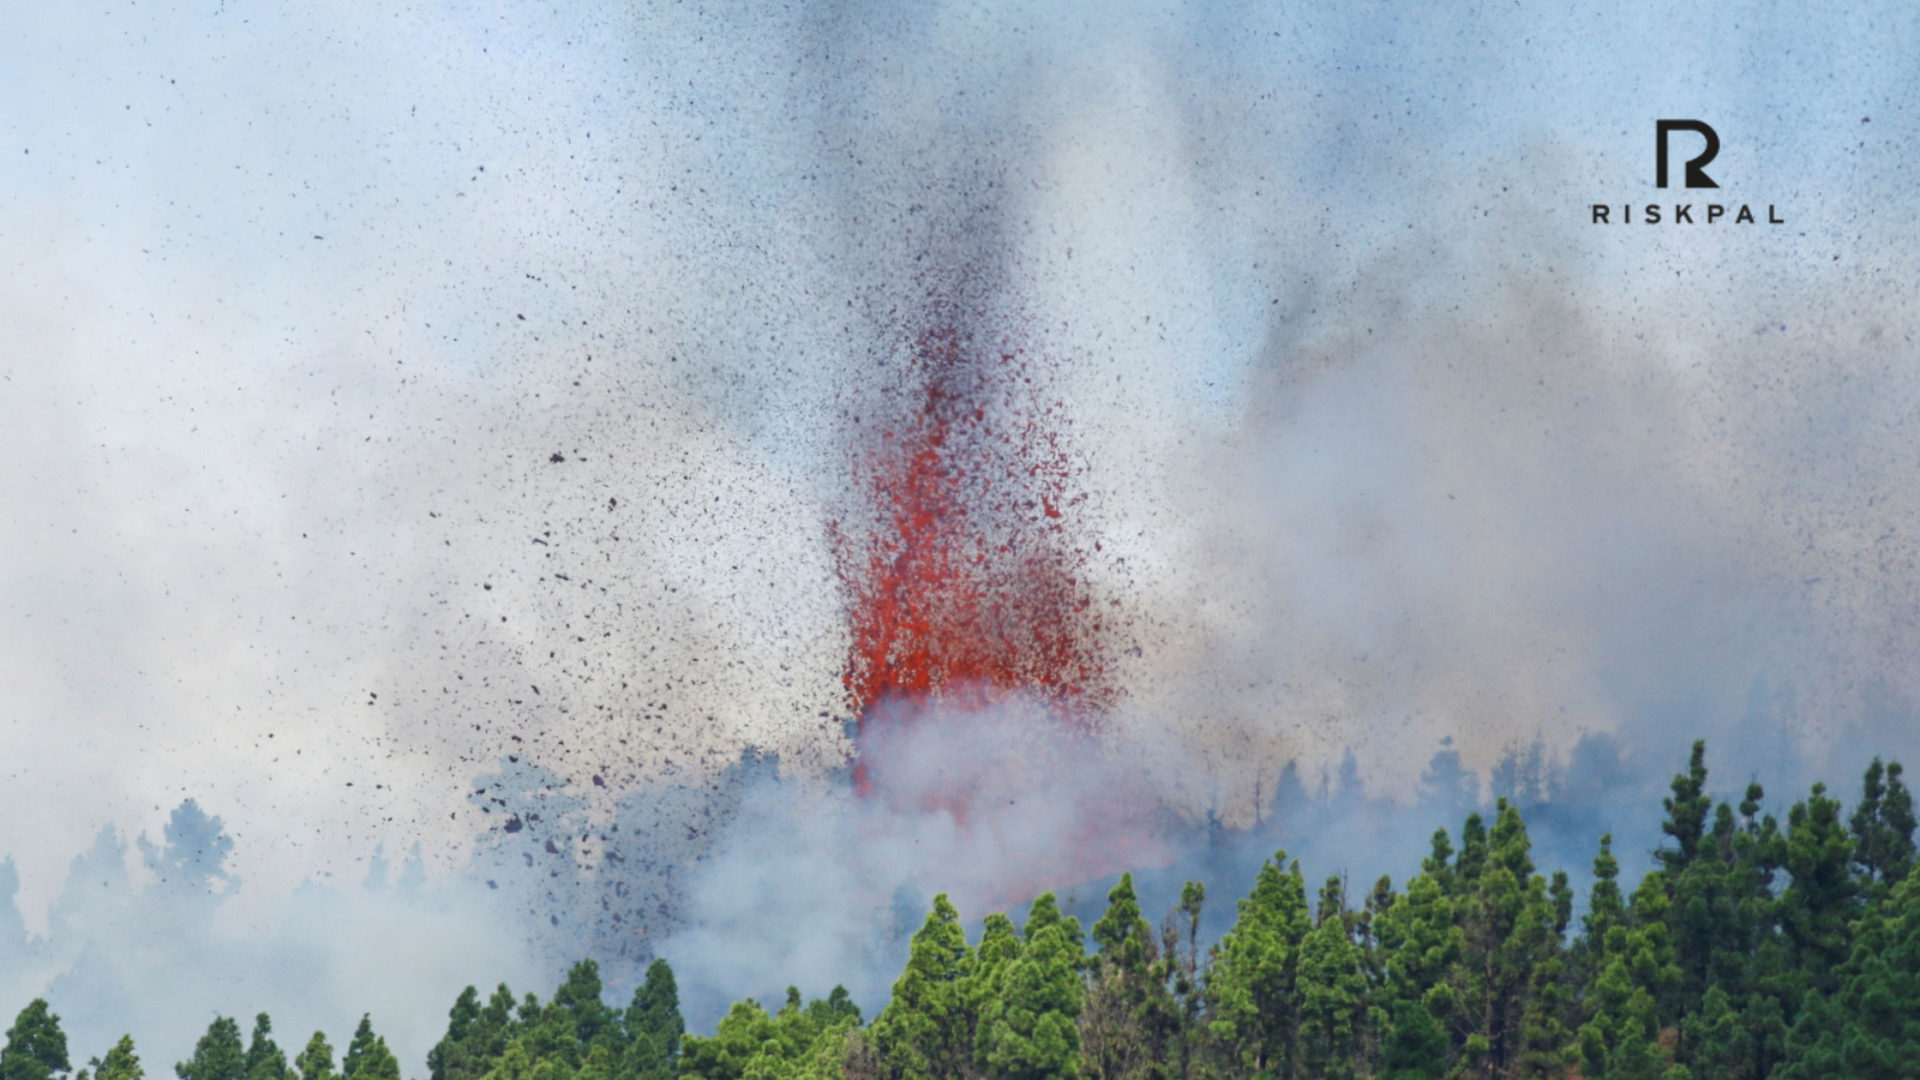 Sample Risk Assessment For Media Workers The Canary Islands Volcano Eruption | RiskPal